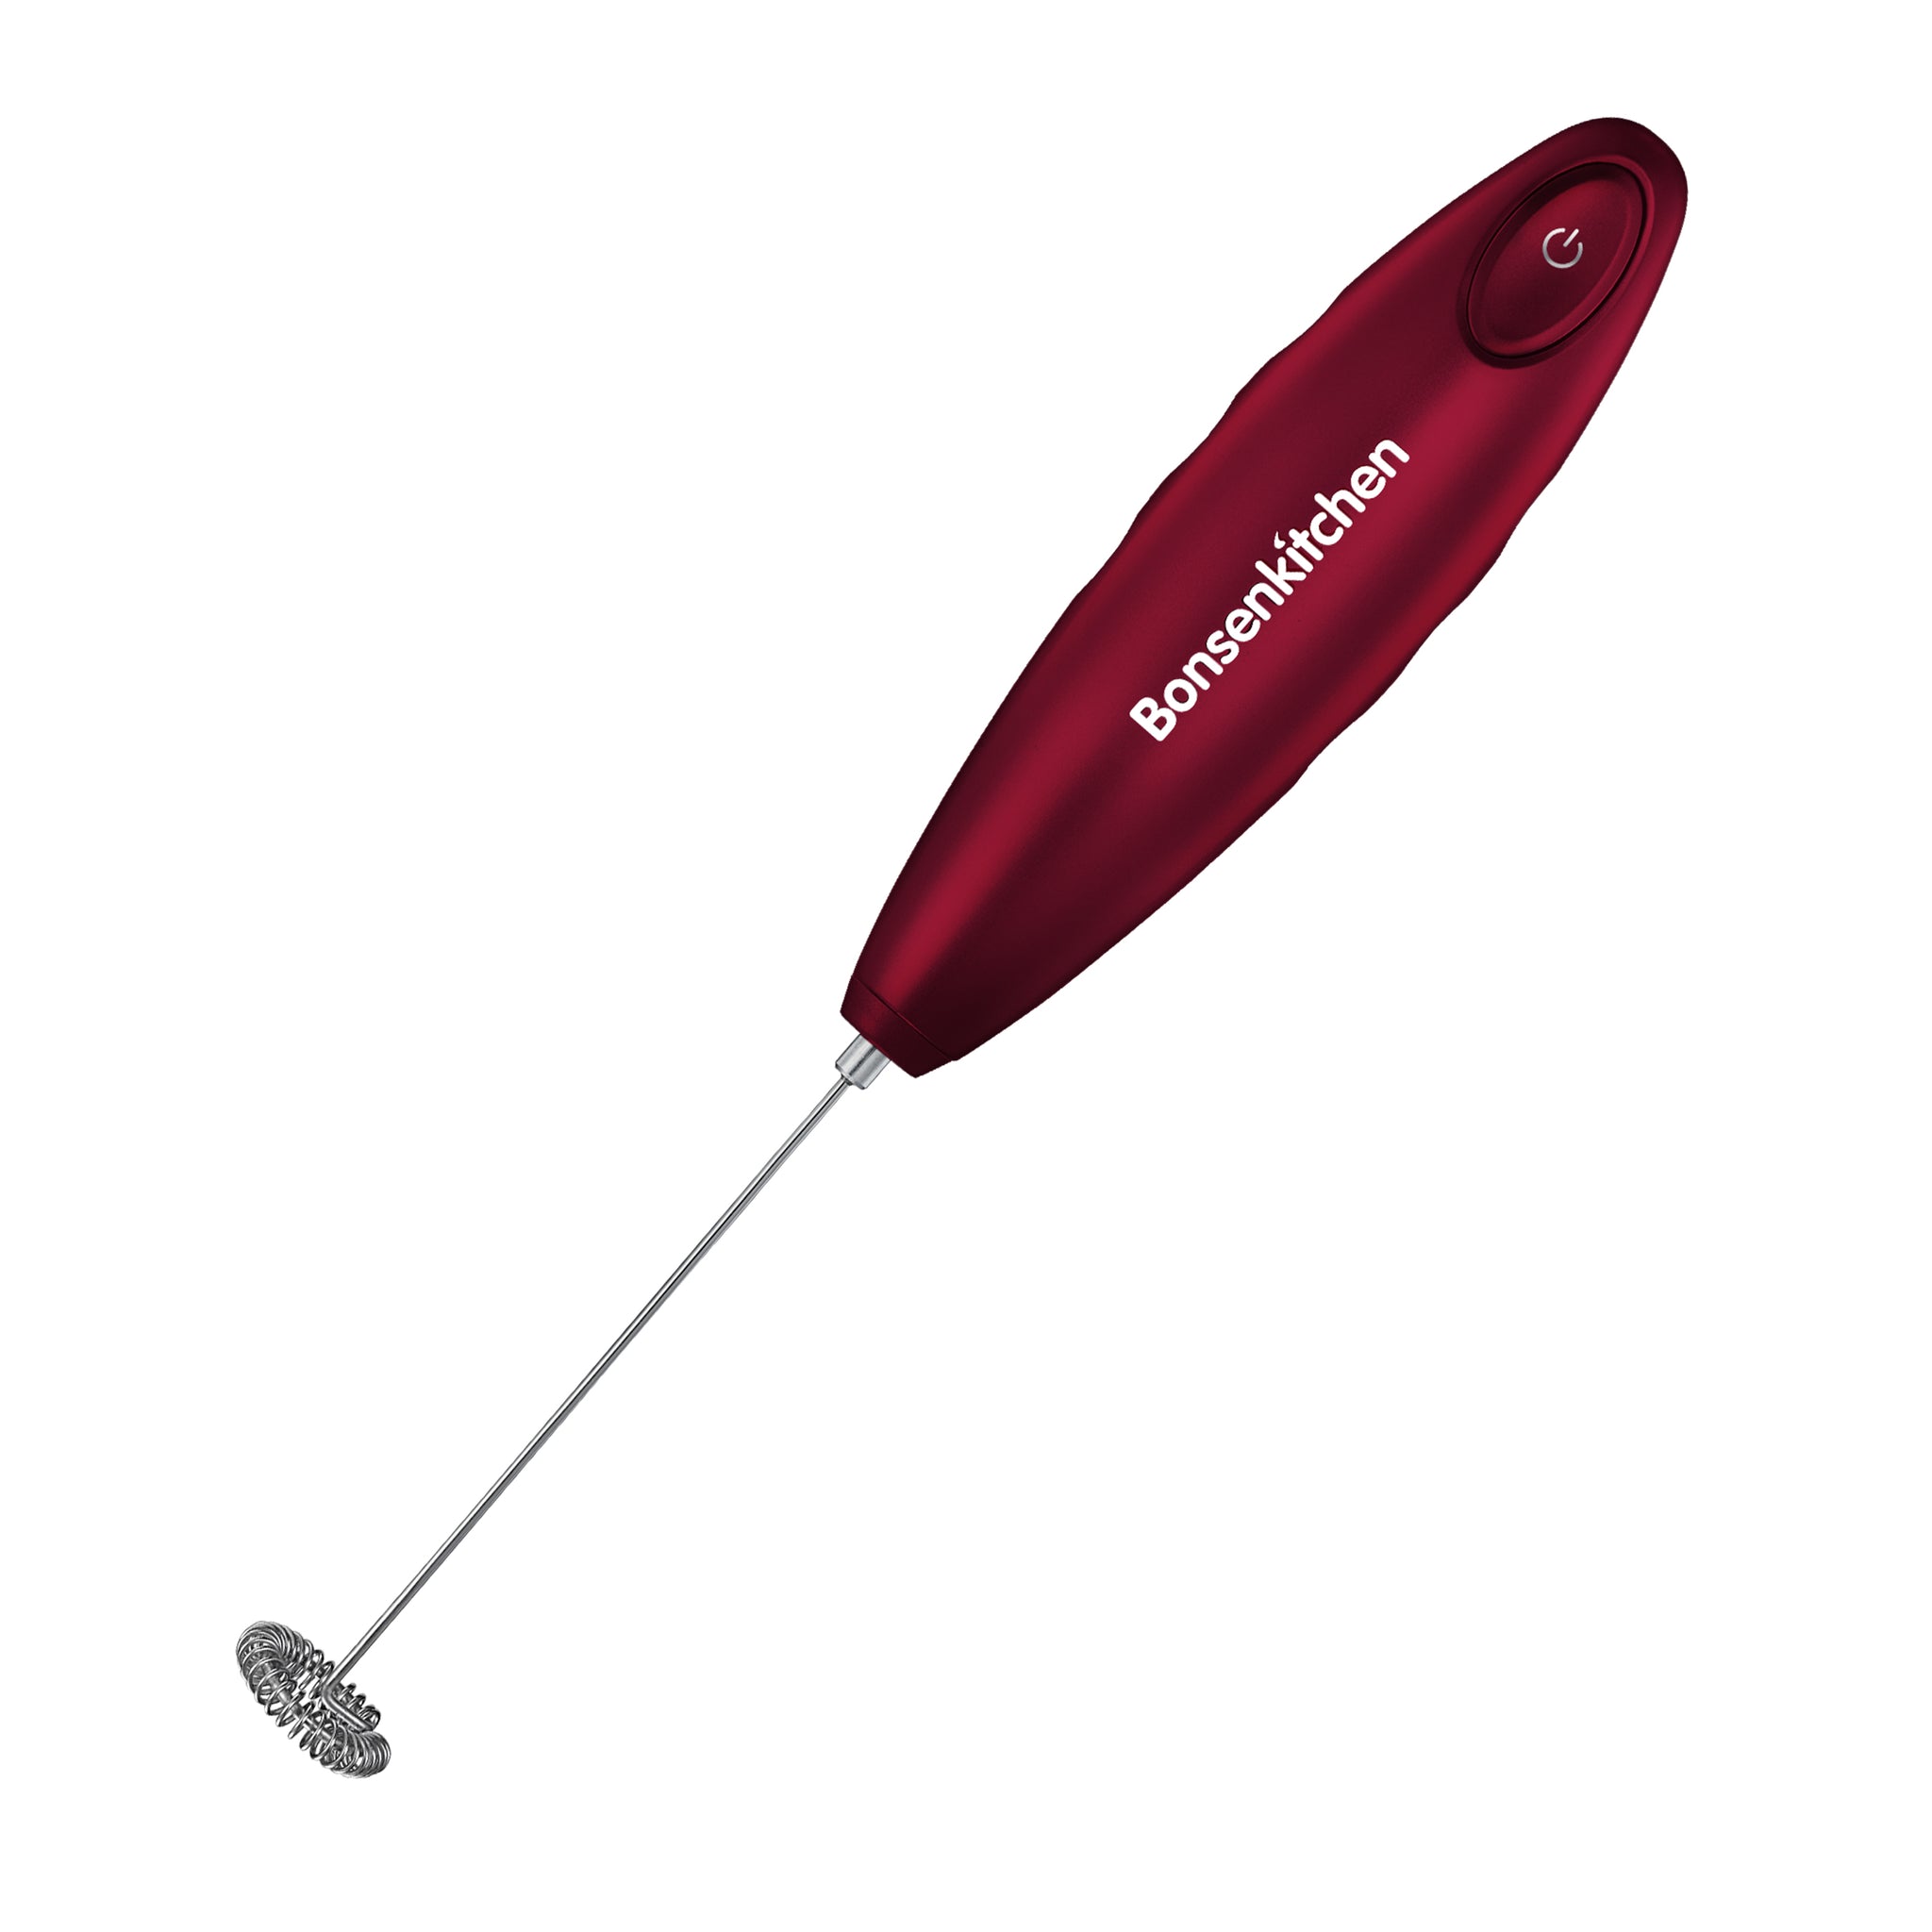 Red Electric Milk Frother